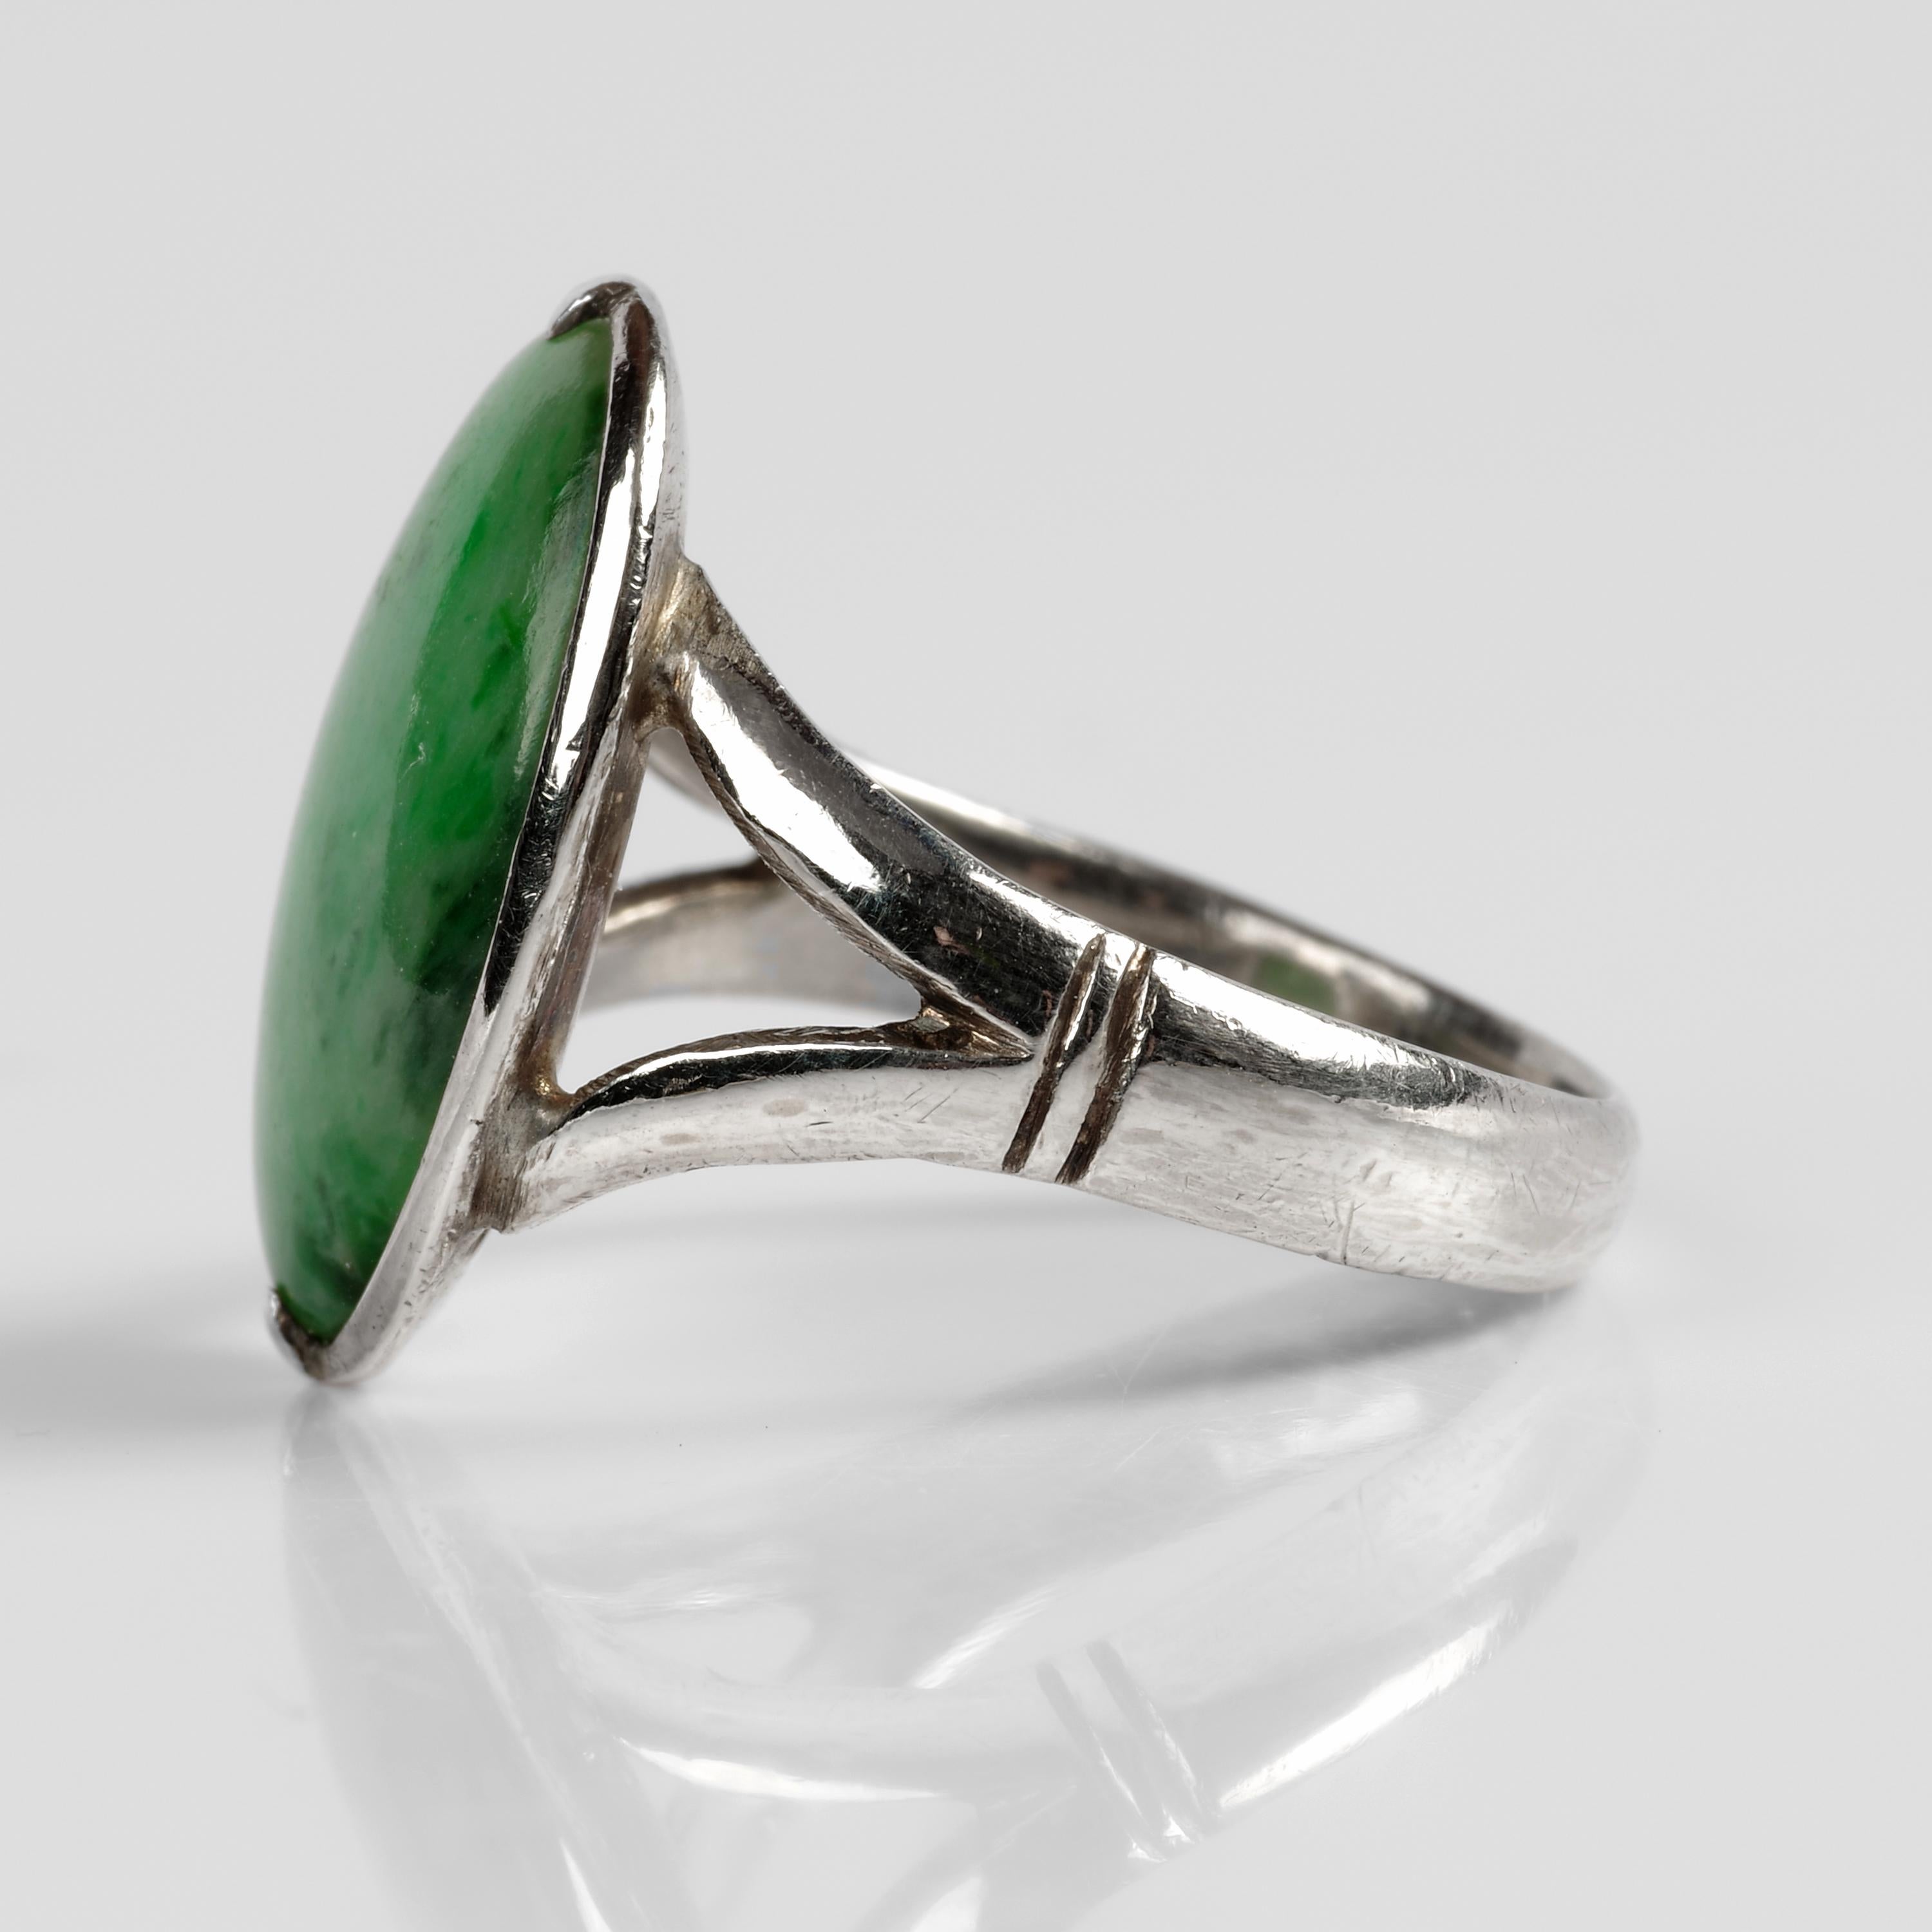 Featuring a large (18.3 x 12.3) oval cabochon of mottled, translucent green jade set within a brilliantly simple hand-made 14K white gold mounting, this late Art Deco-era (circa 1939) ring is a study of sleek simplicity. The highly polished jade